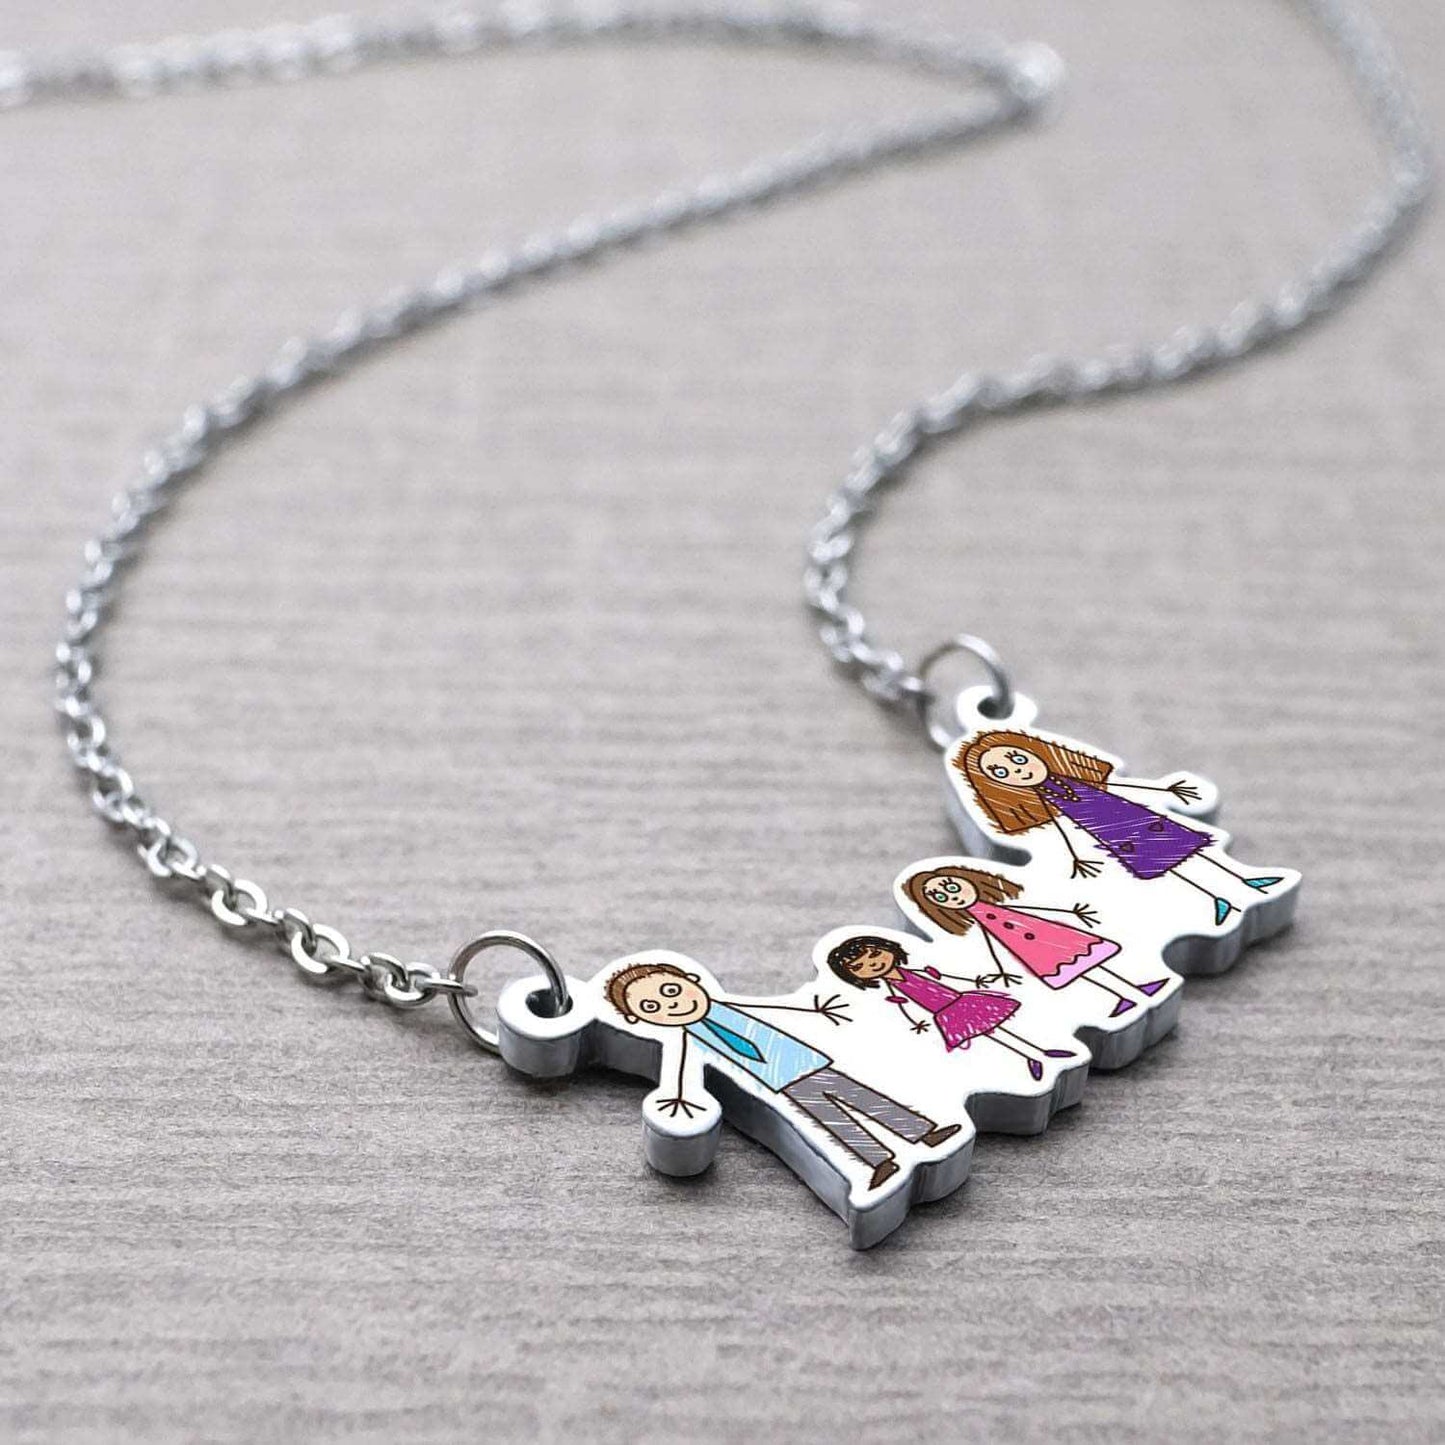 Custom Children's Drawing Photo Necklace